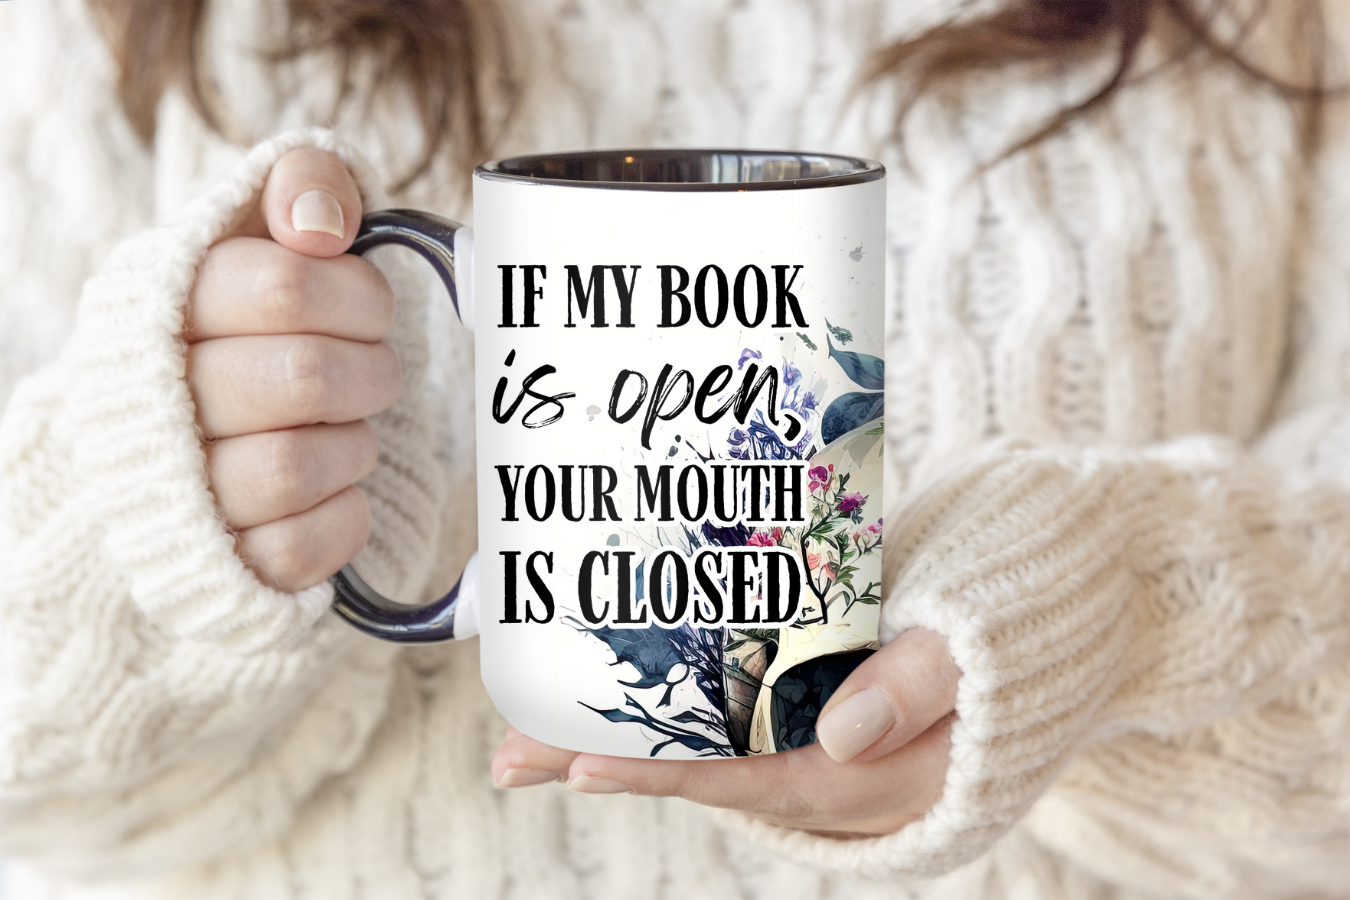 If My Book Is Open Your Mouth Is Closed | Mug - The Pretty Things.ca